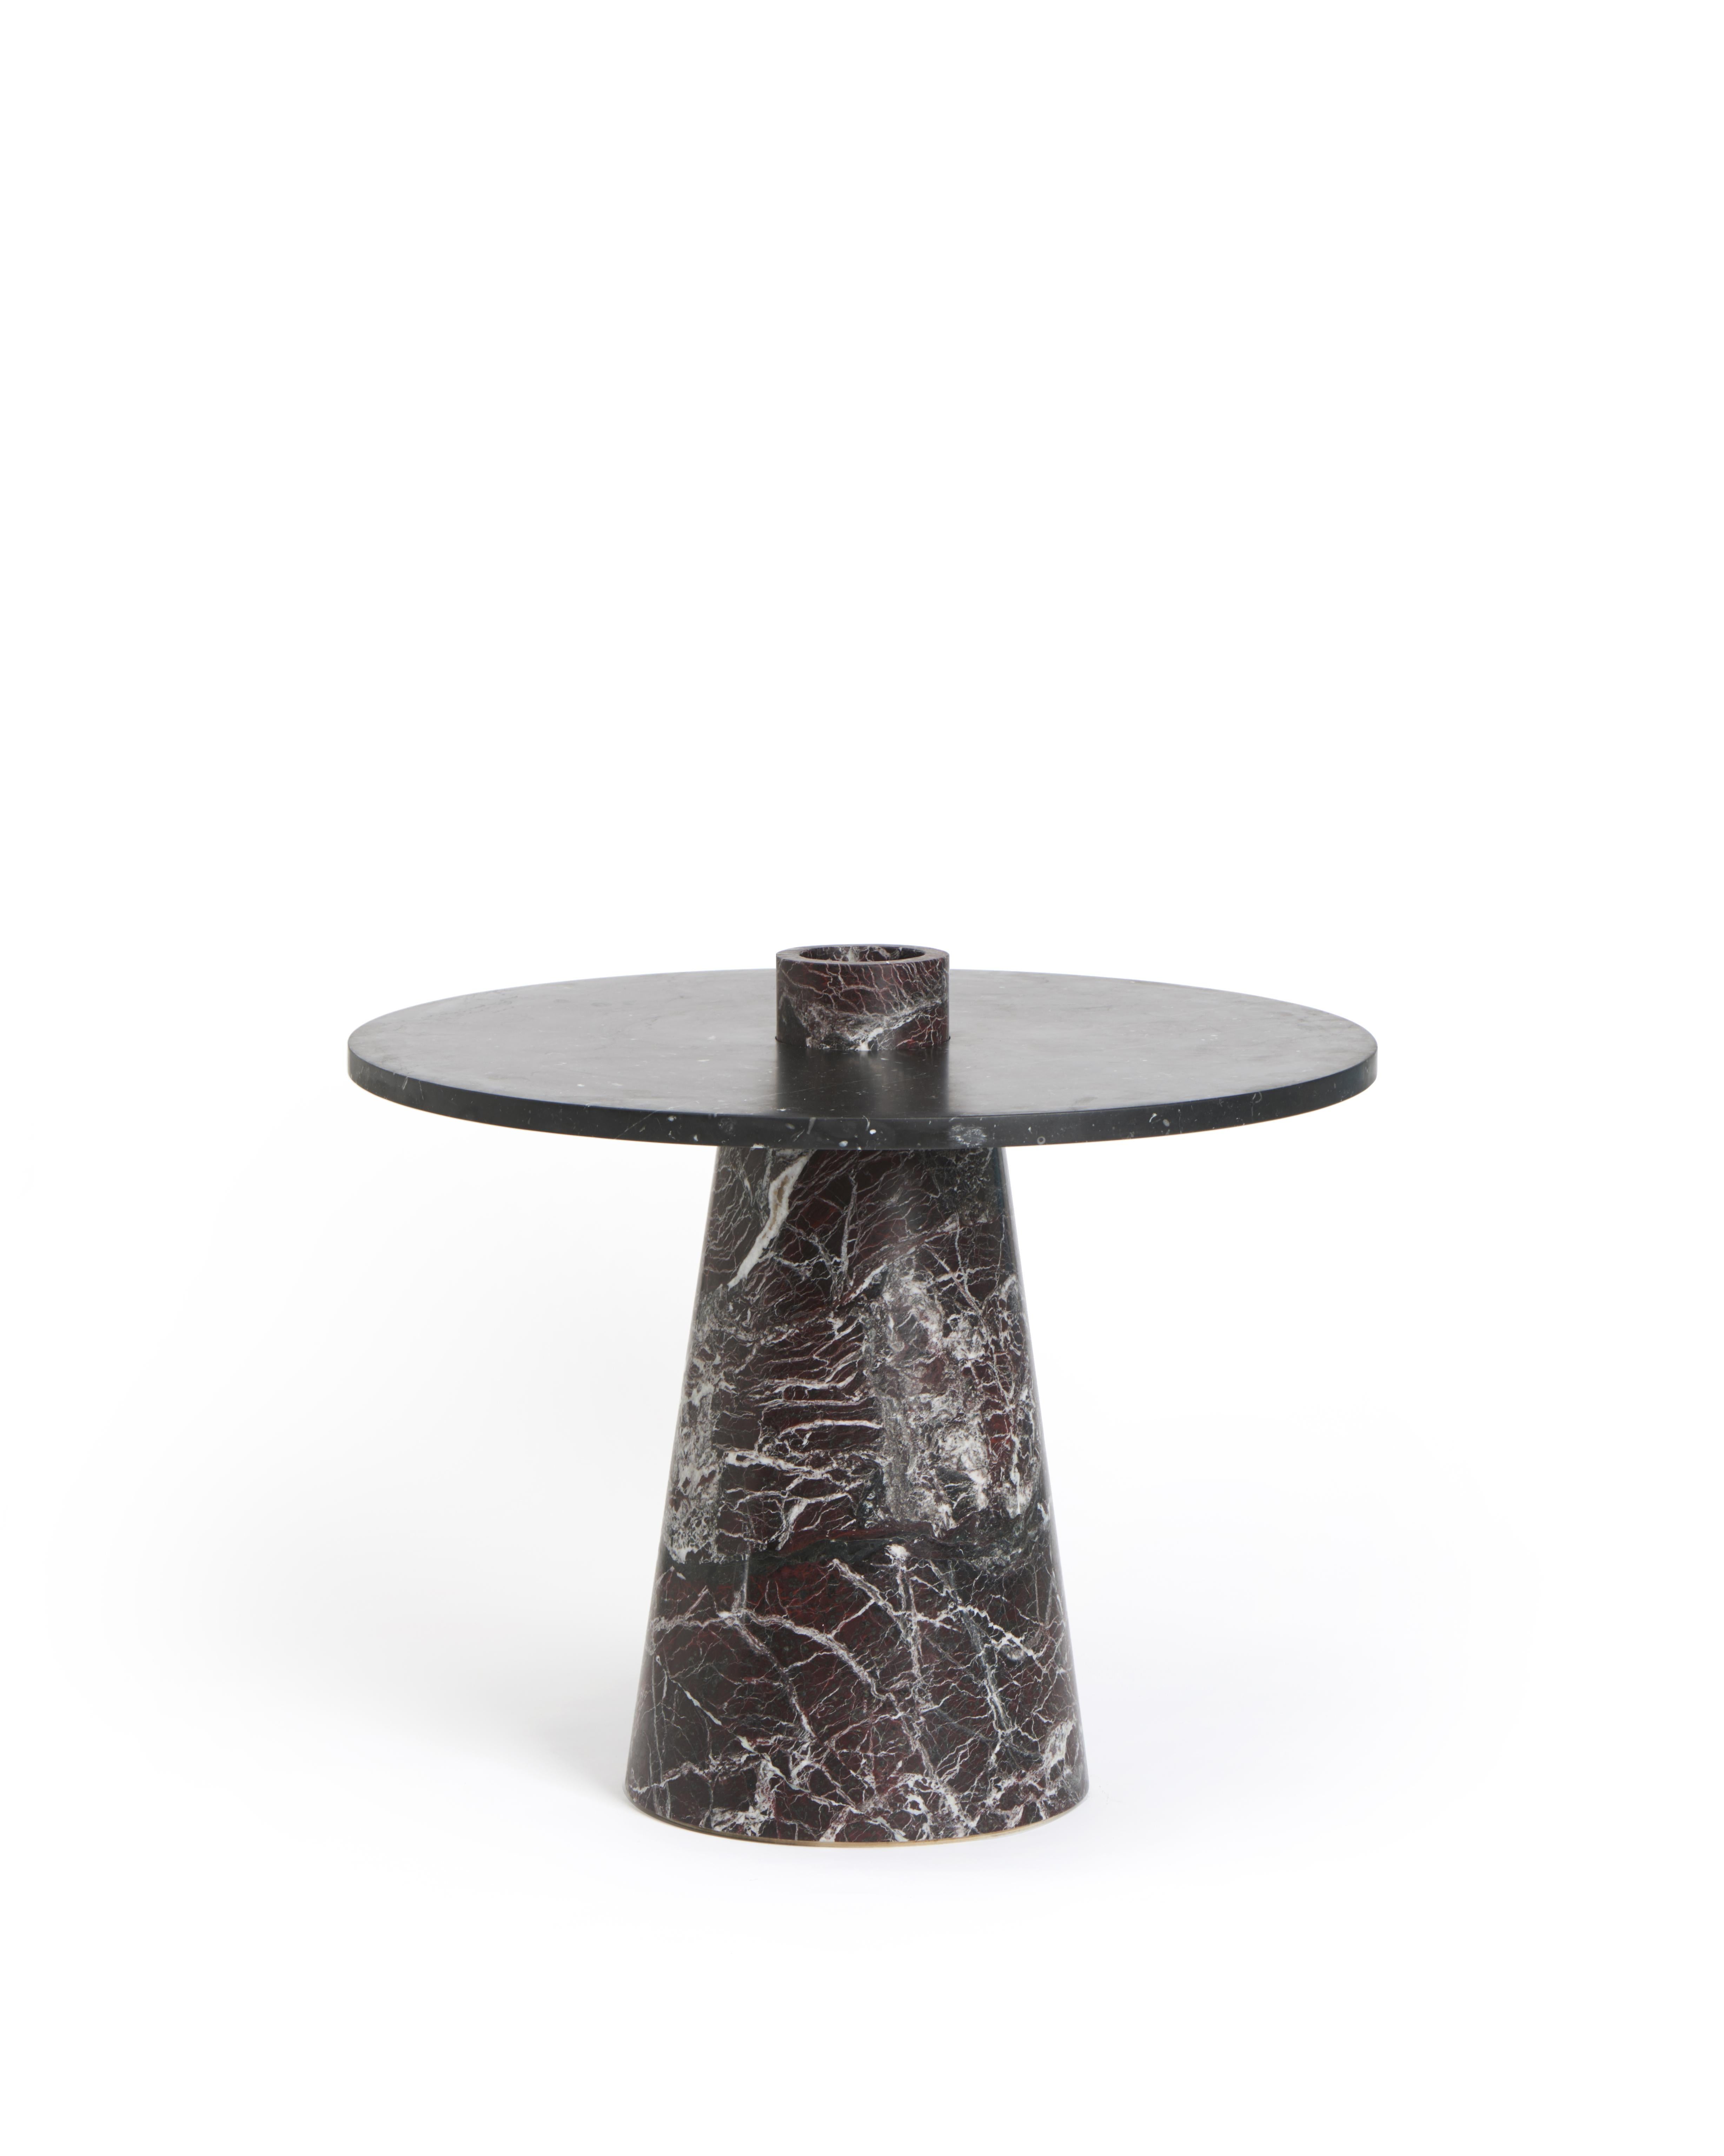 Red inside out table set by Karen Chekerdjian
Dimensions: 58 x 32 x 70 cm
Materials: Rosso Levanto, Nero Marquinia
Includes: Fruit bowl, candle holder, flower vase in red marble

Karen’s trajectory into designing was unsystematic, comprised of